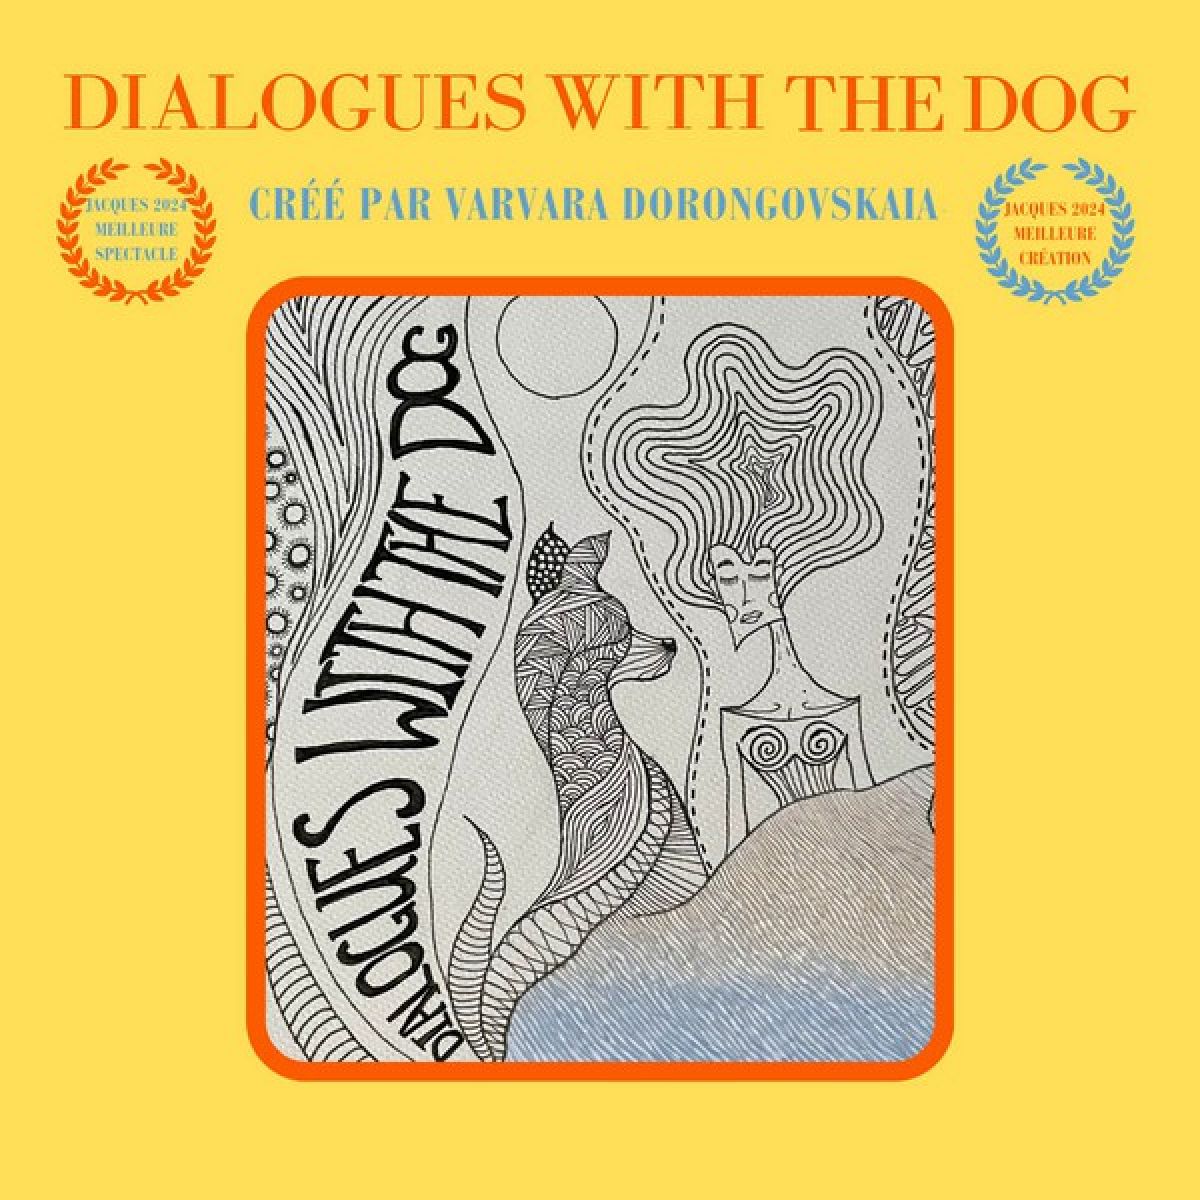 Dialogues with the dog